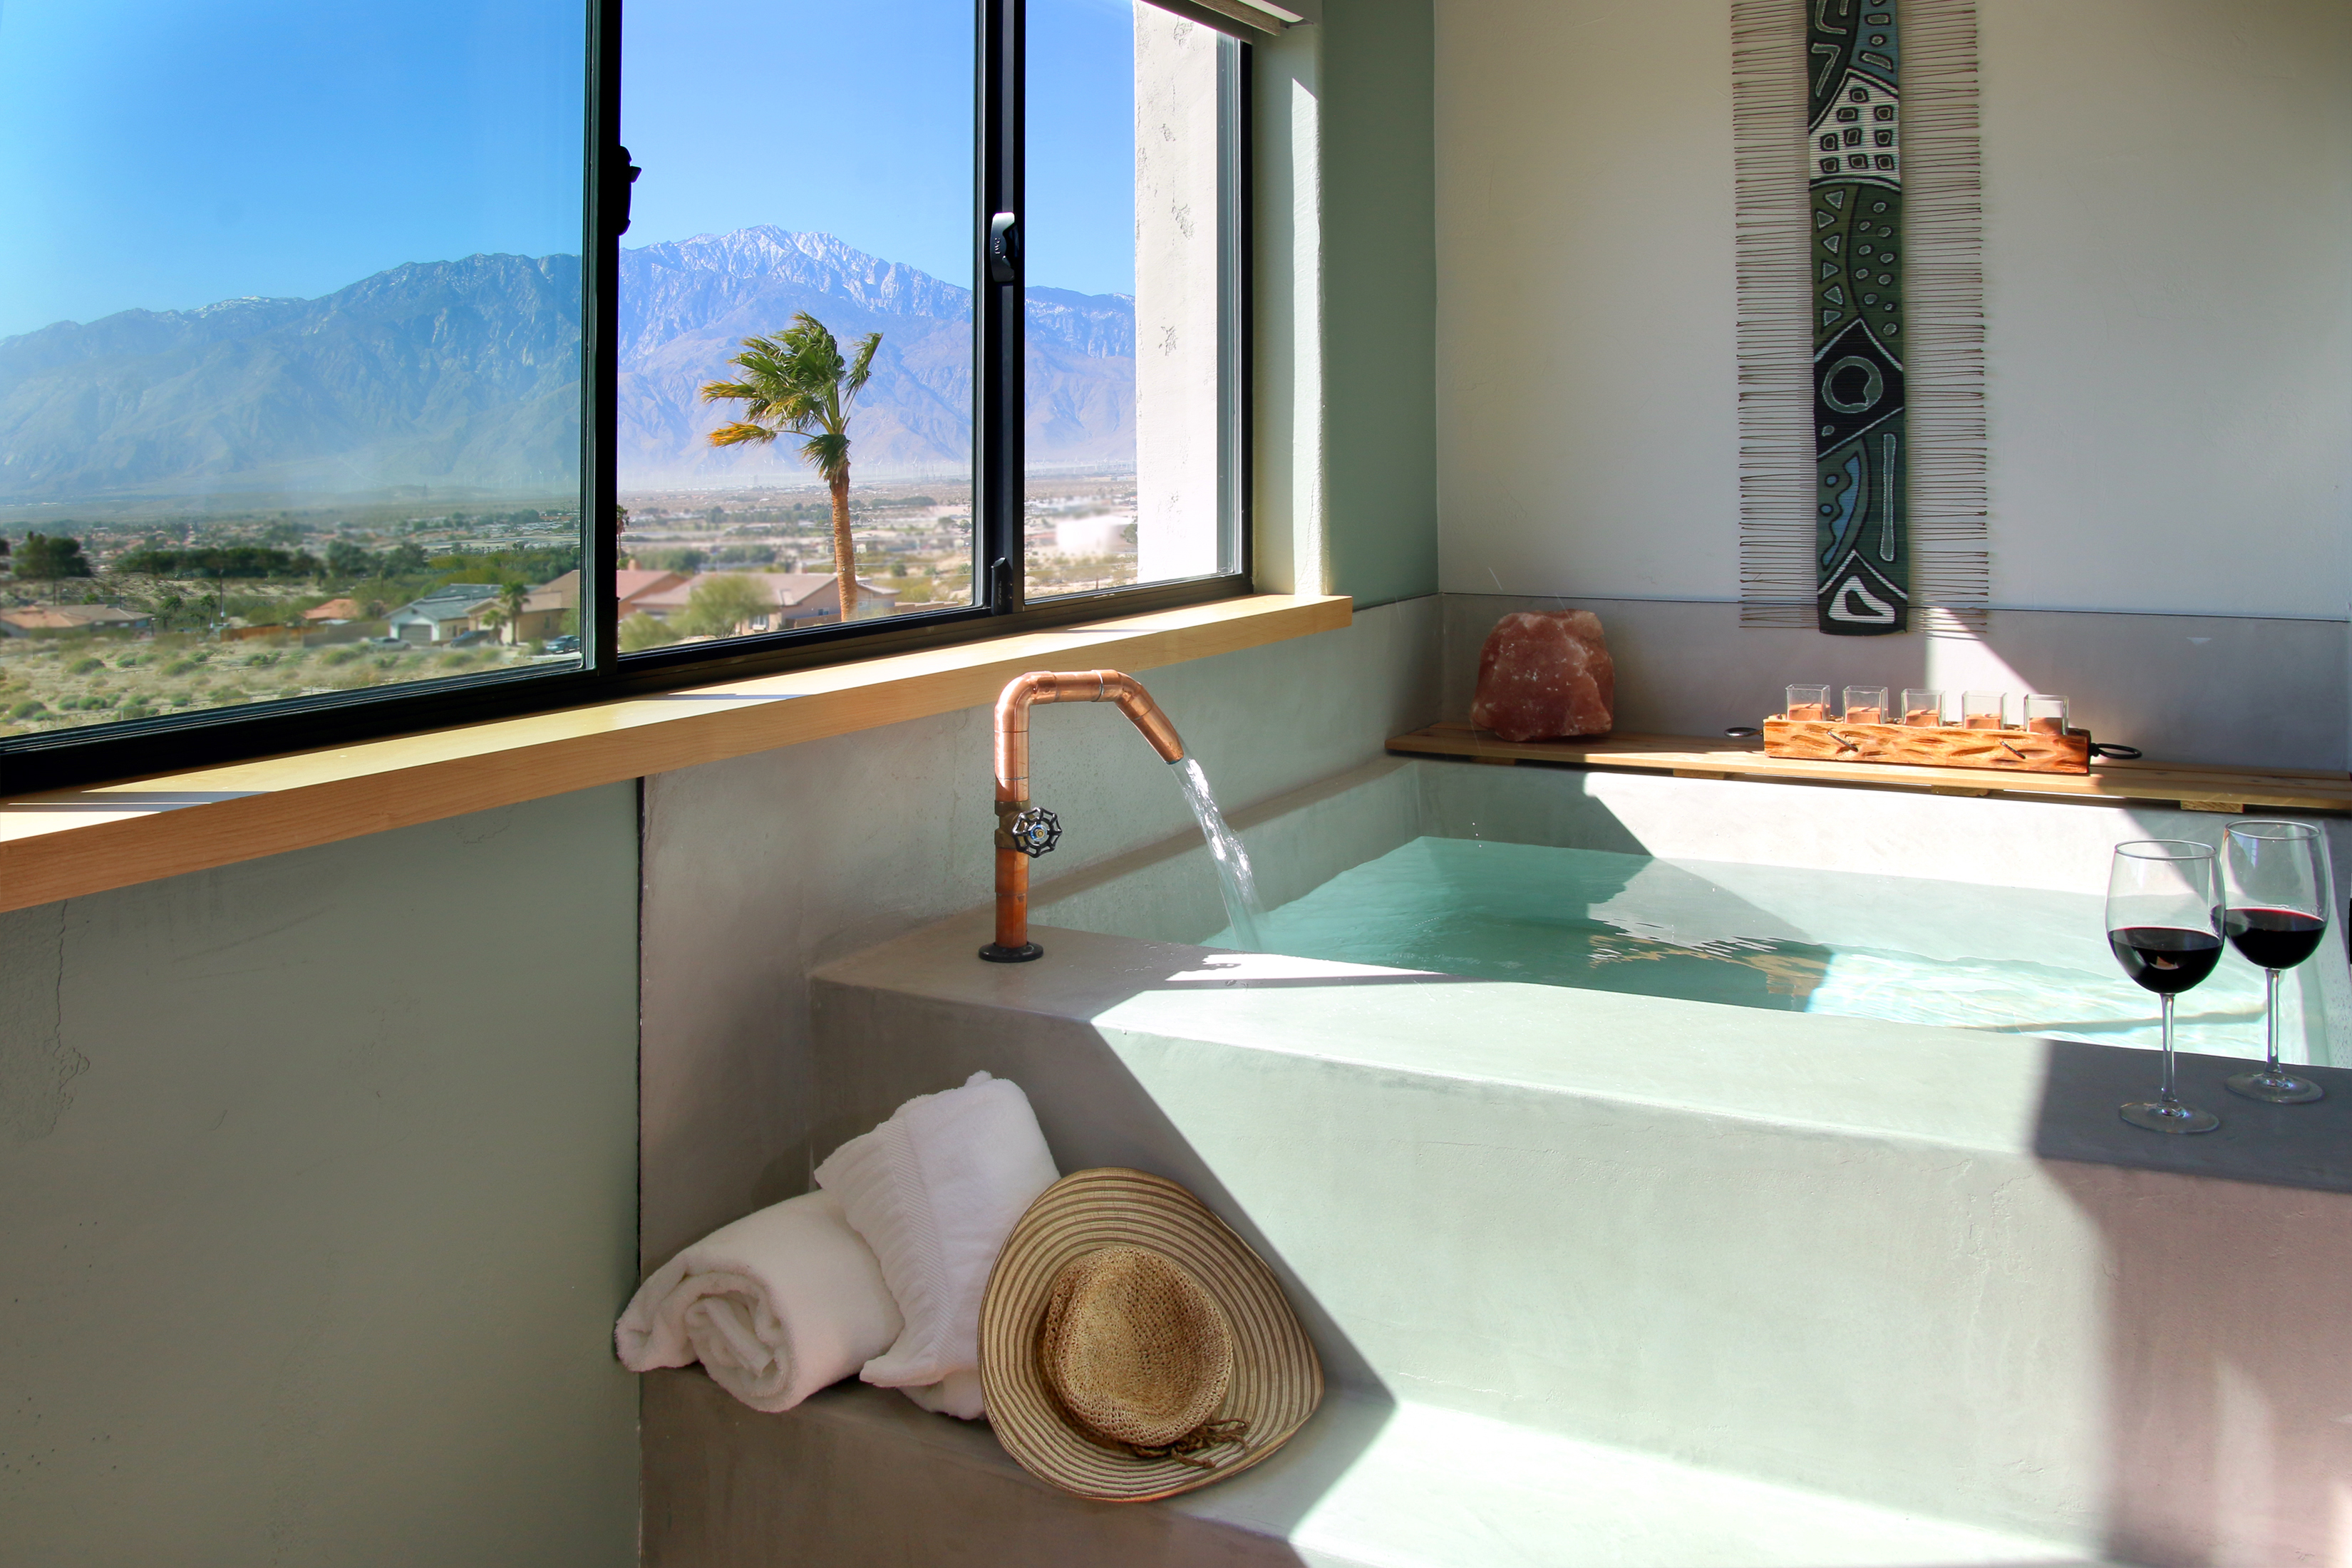 A mineral spring-fed hot tub at the Azure Palm Springs Resort